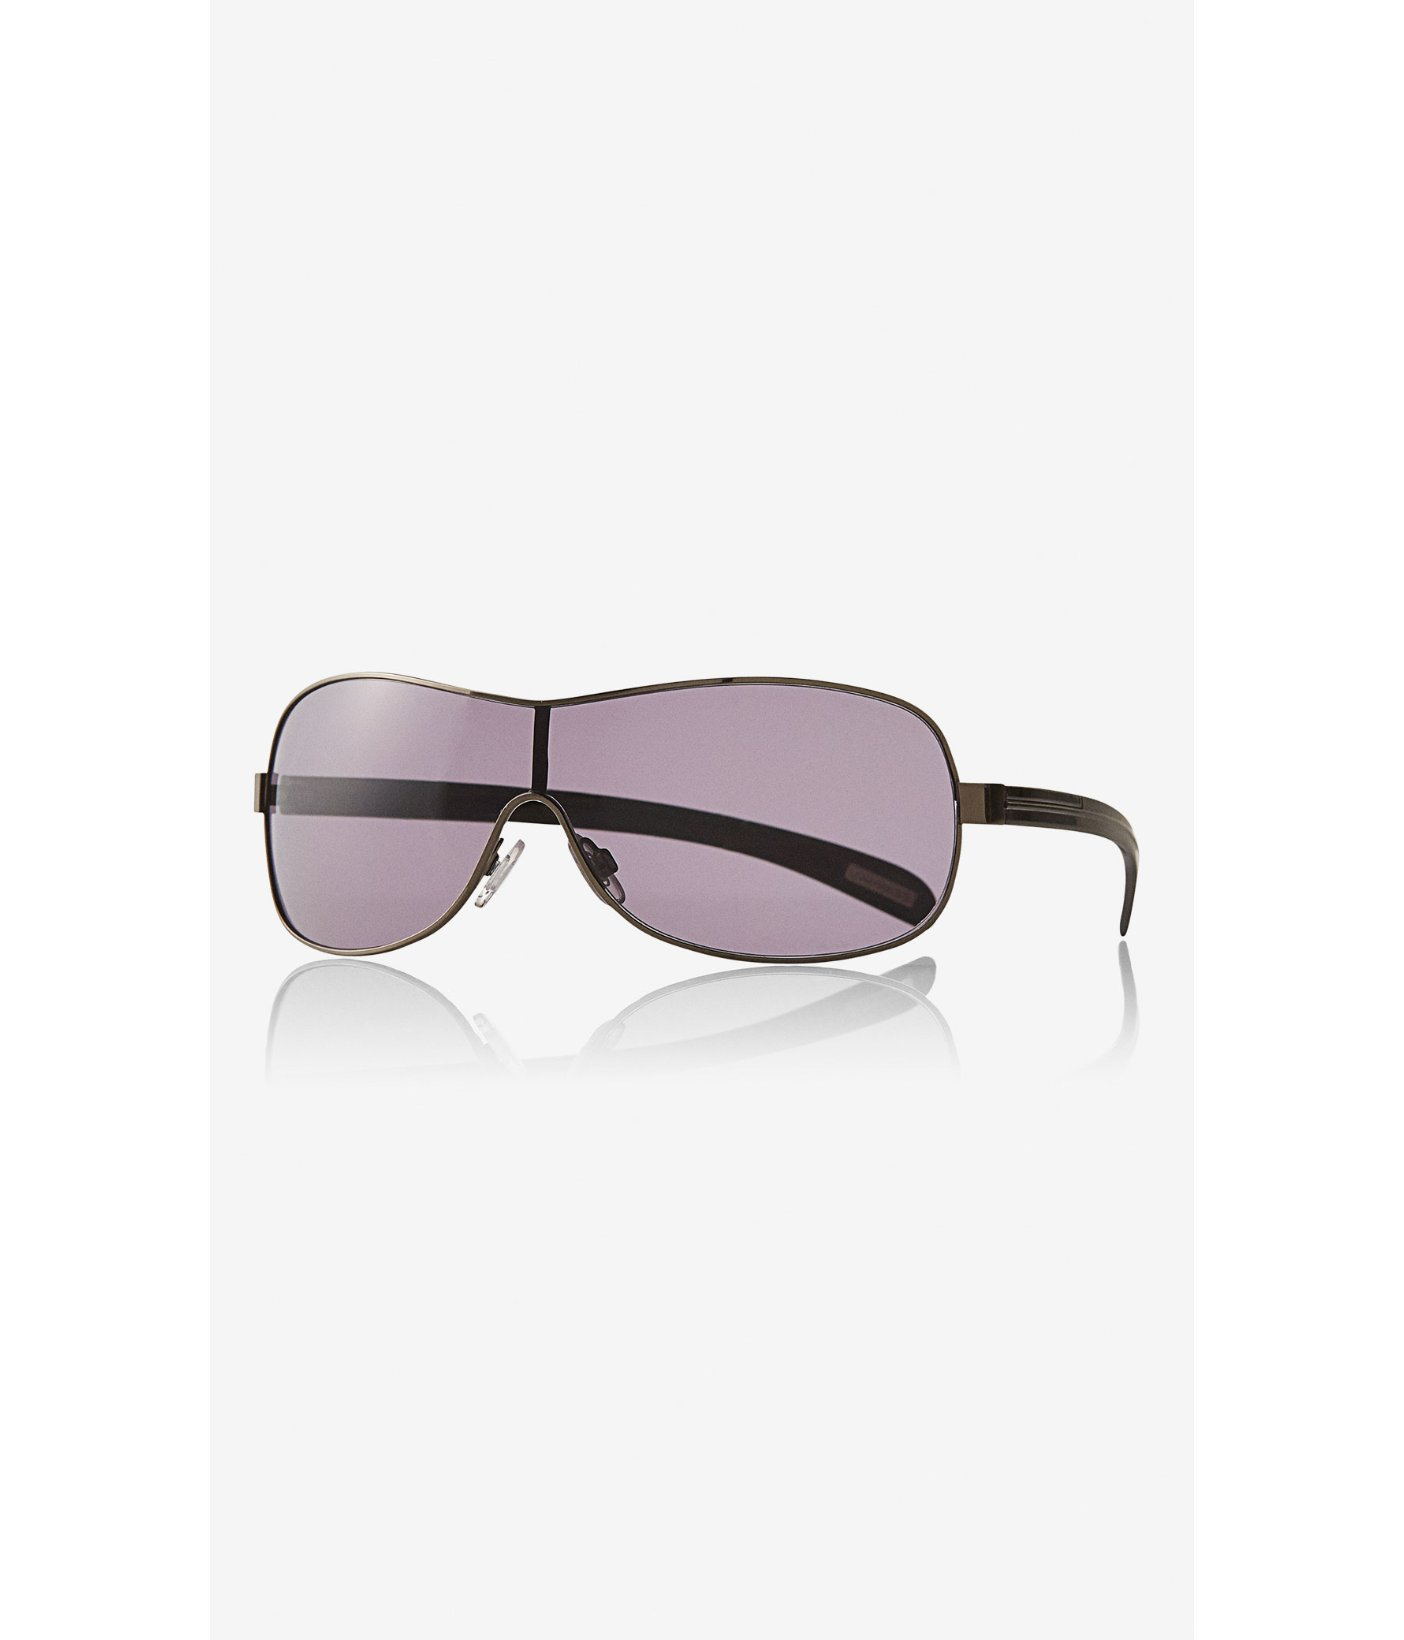 Lyst - Express Hand Polished Black Shield Sunglasses in Metallic for Men